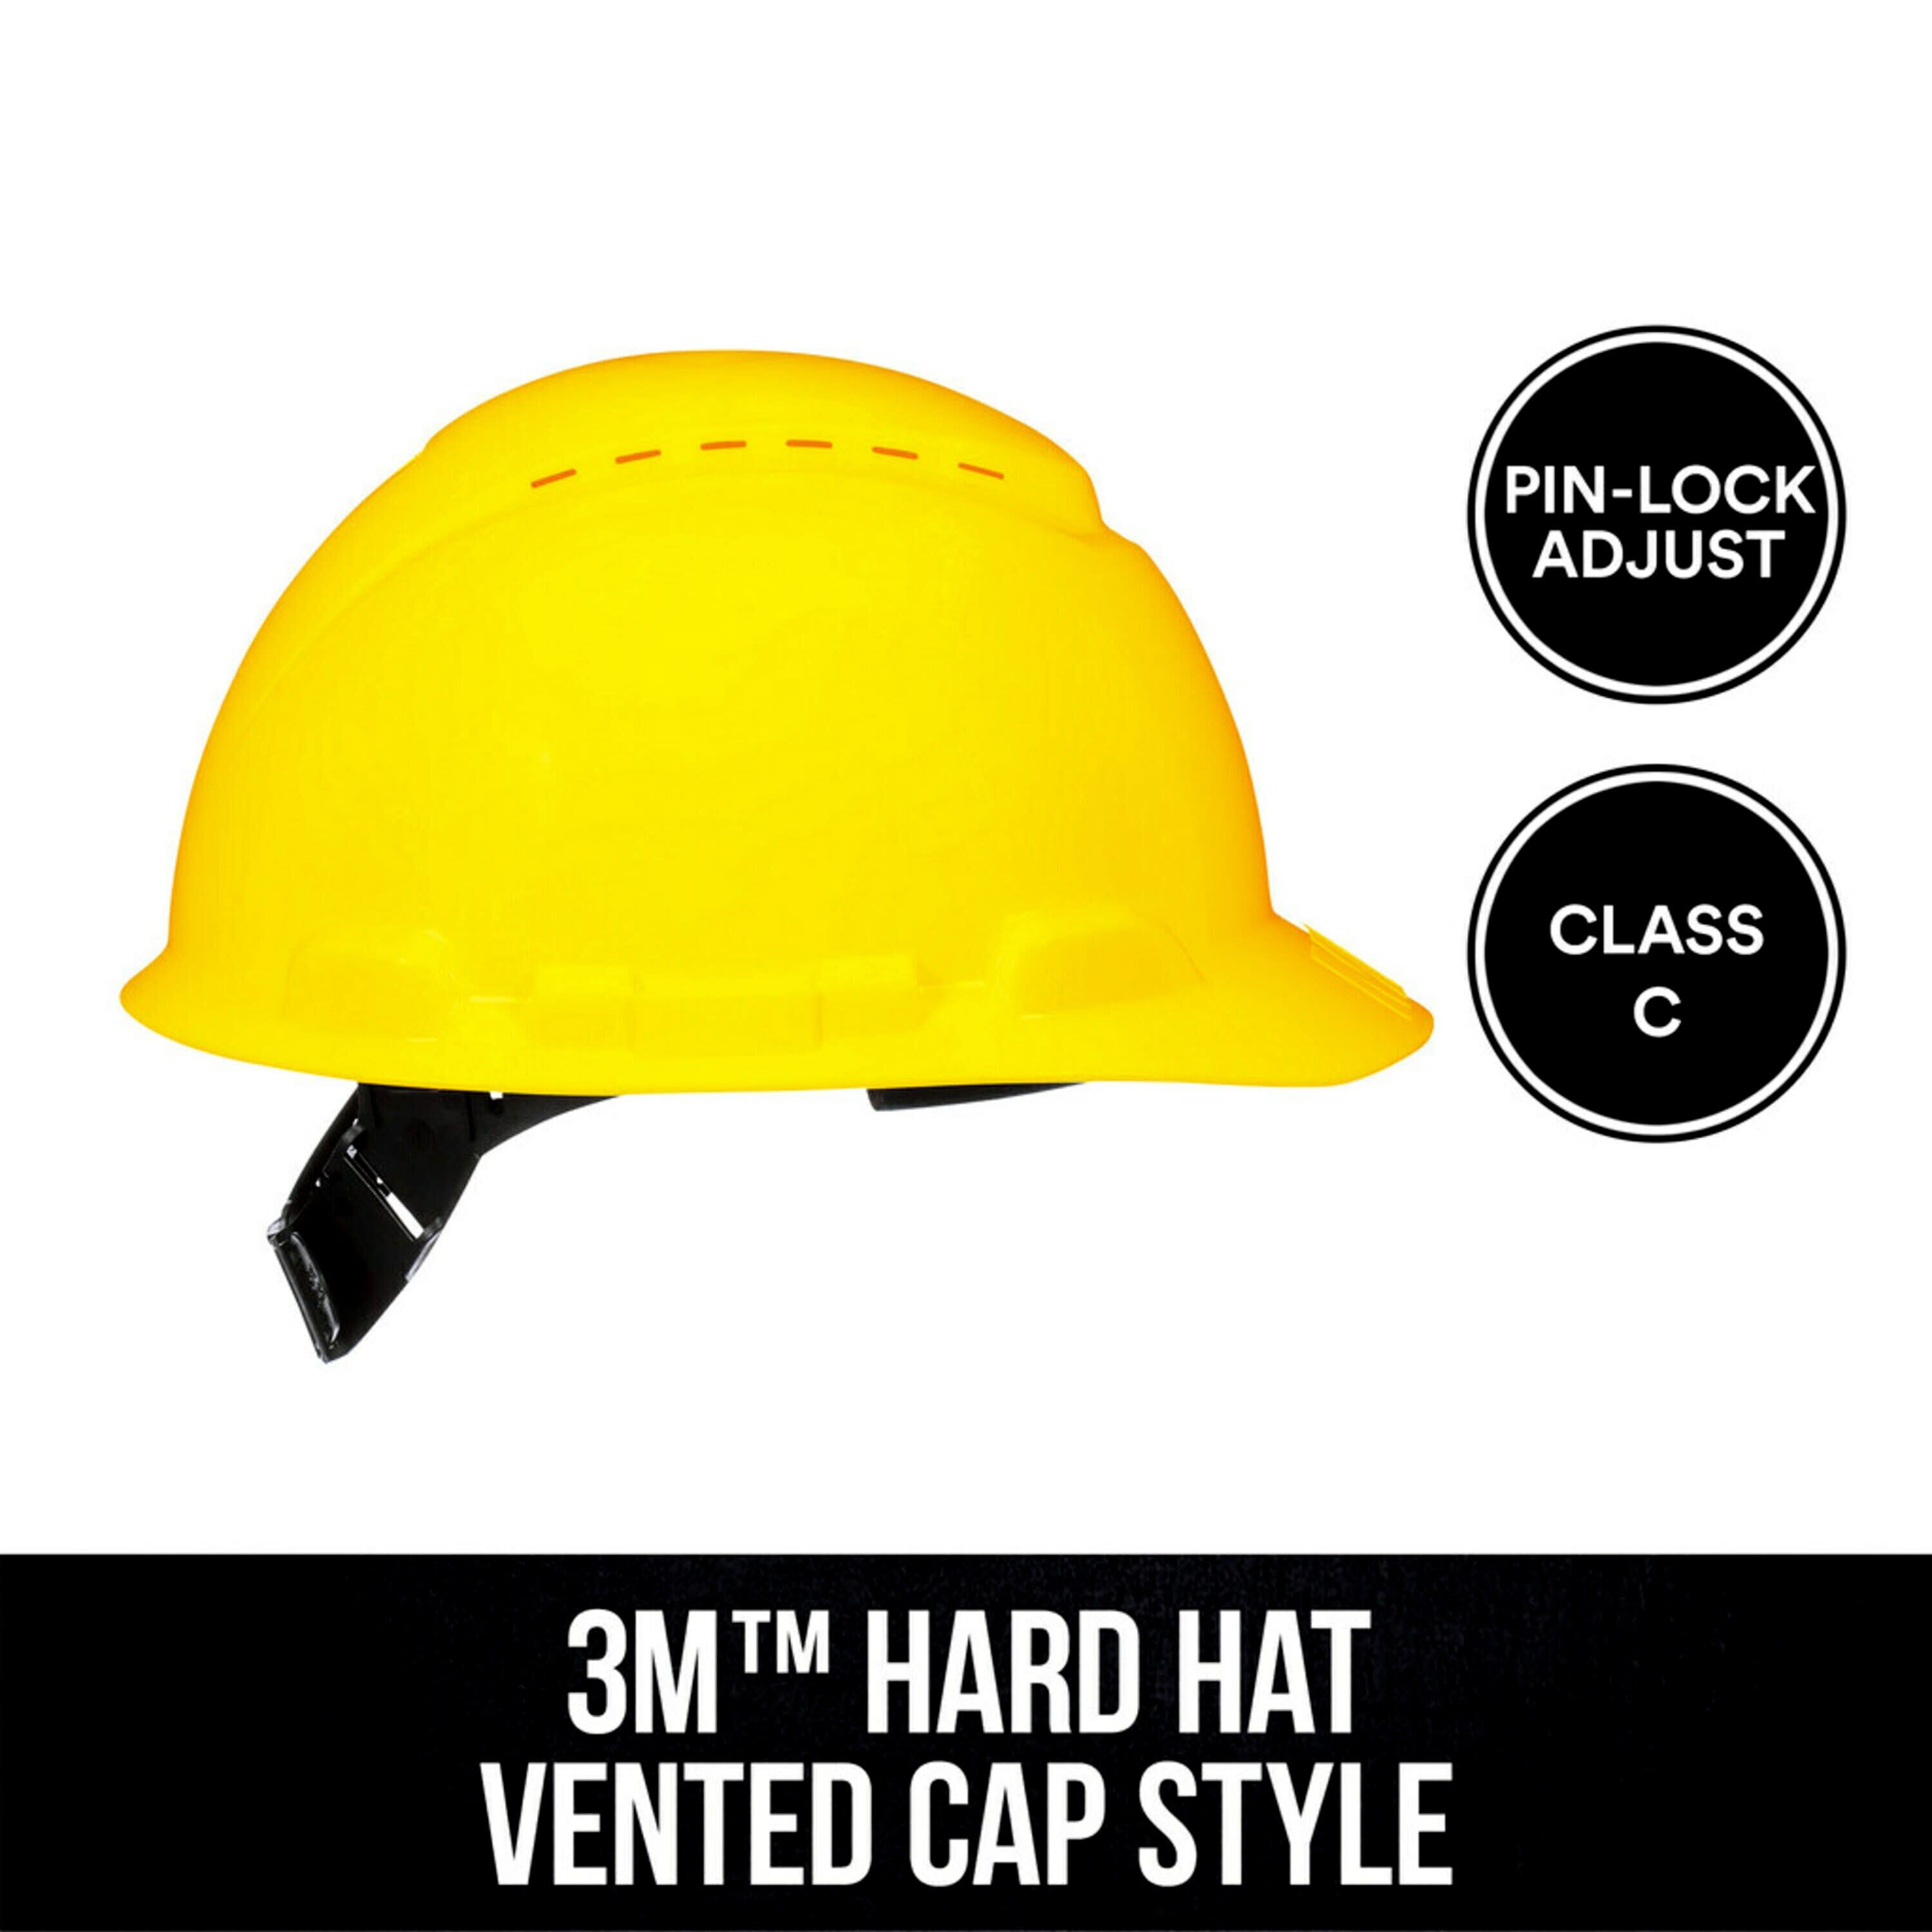 hat inserts to make fit smaller Hard Hat Accessories la caps for men hard  hat